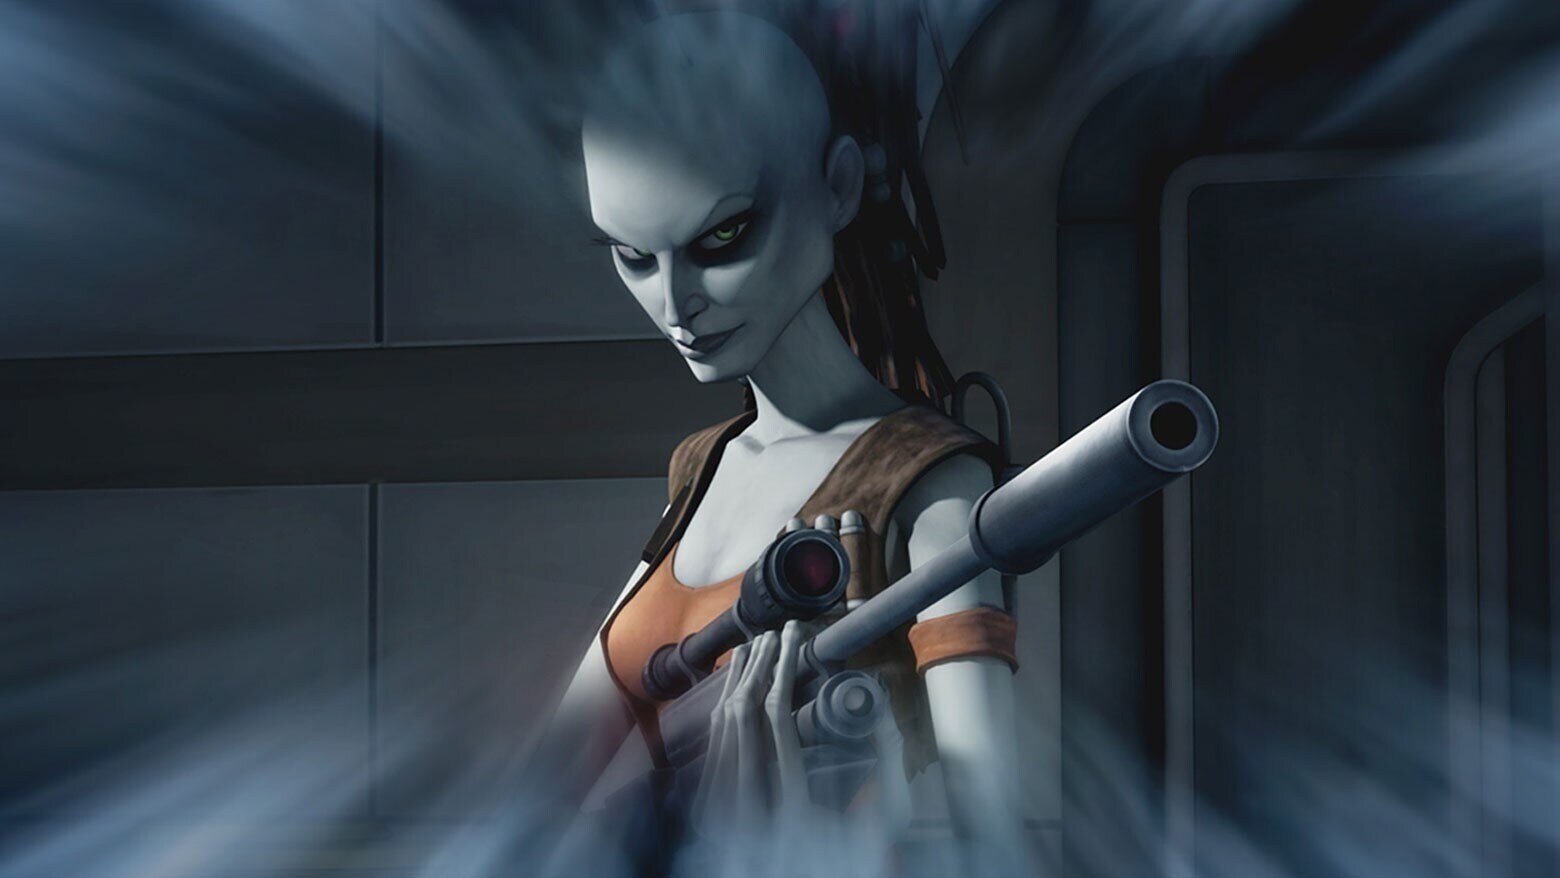 Aurra Sing holding a blaster rifle in The Clone Wars